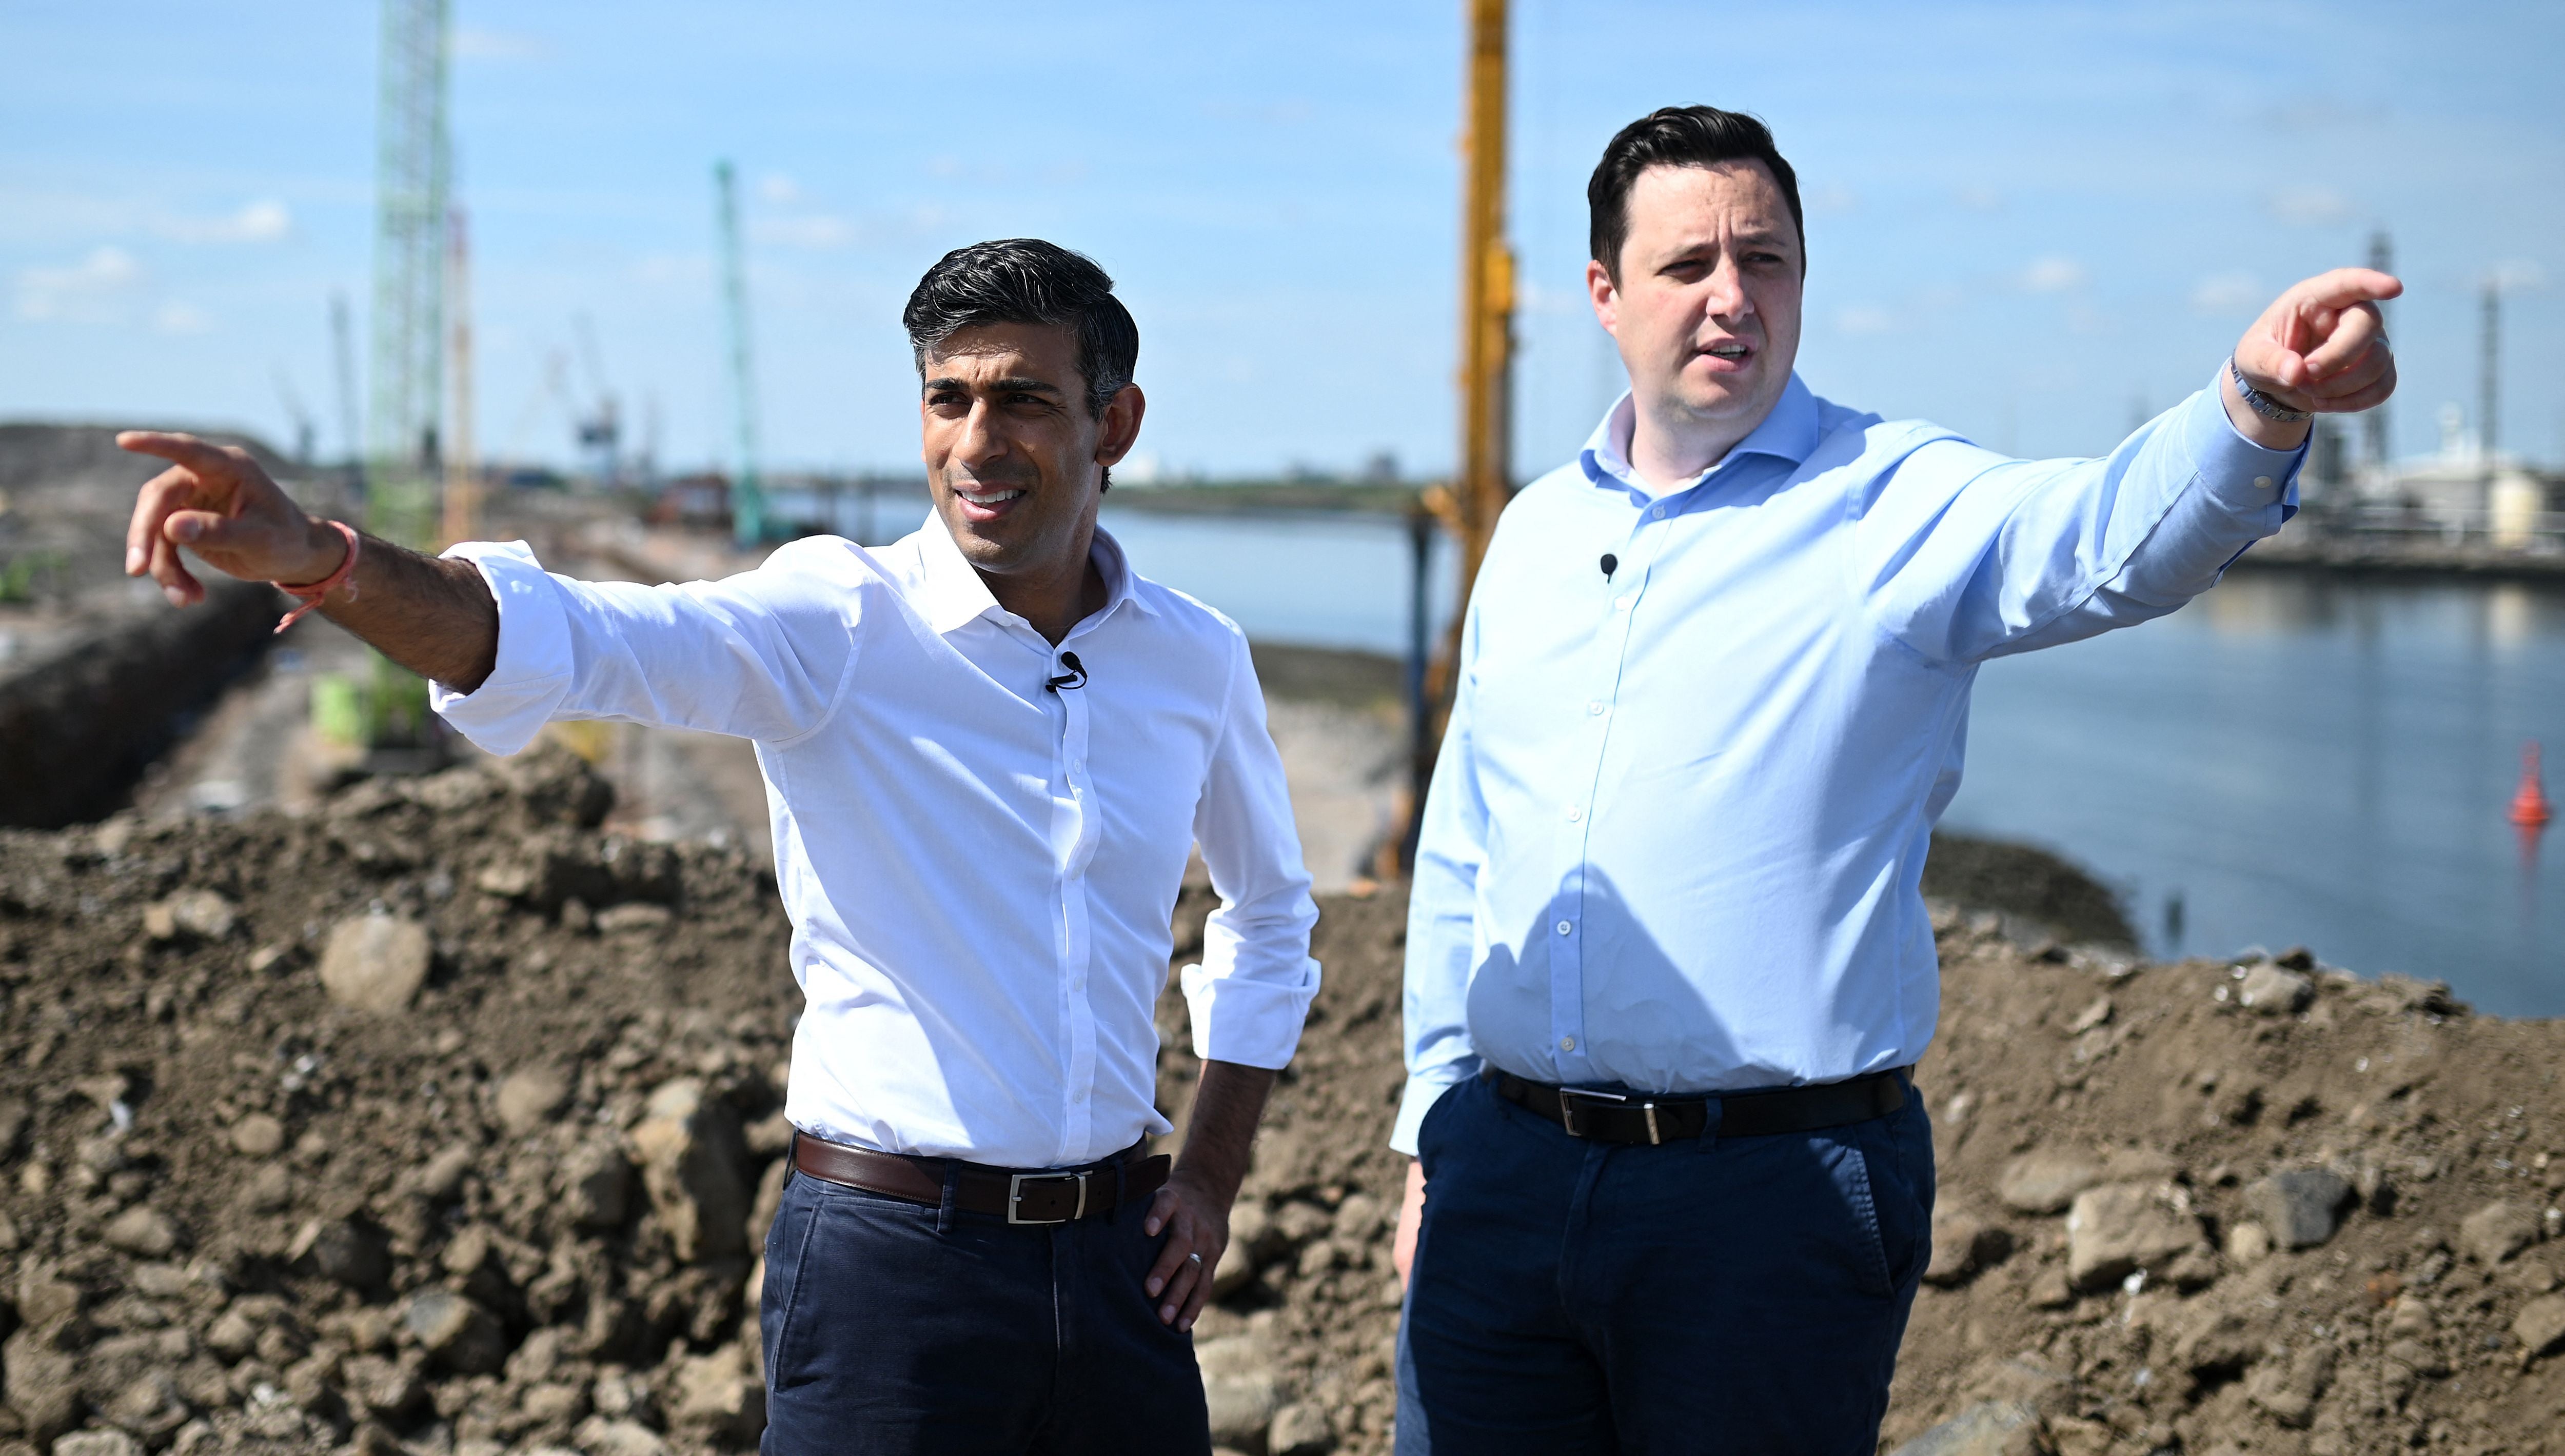 Sunak and Houchen during a visit to see the construction works at Teesside Freeport in Redcar in July 2022